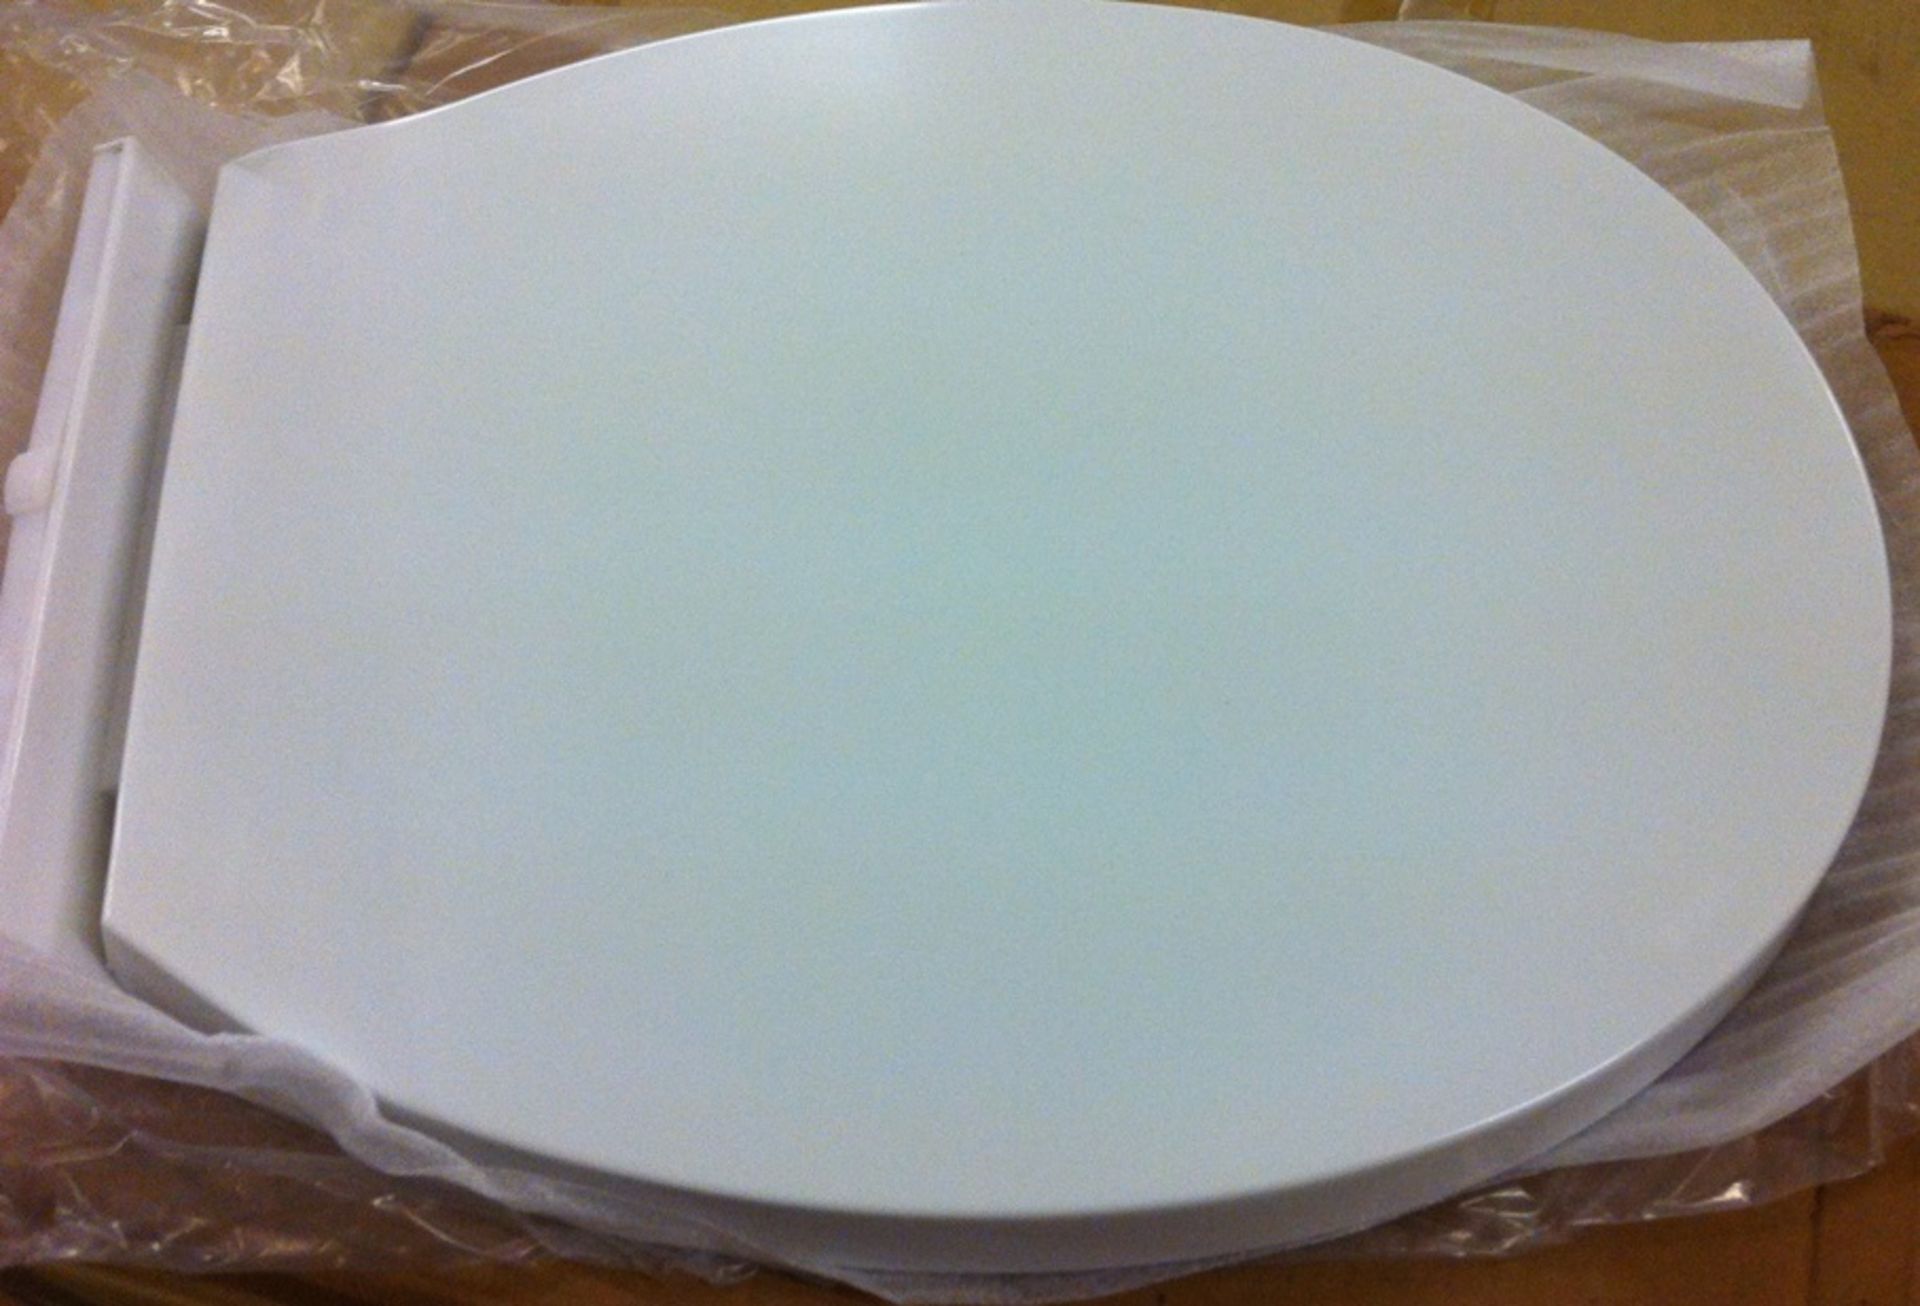 50 x Deluxe Soft Close White Toilet Seats - Brand New Boxed Stock - CL034 - Ideal For Resale - Vogue - Image 4 of 5